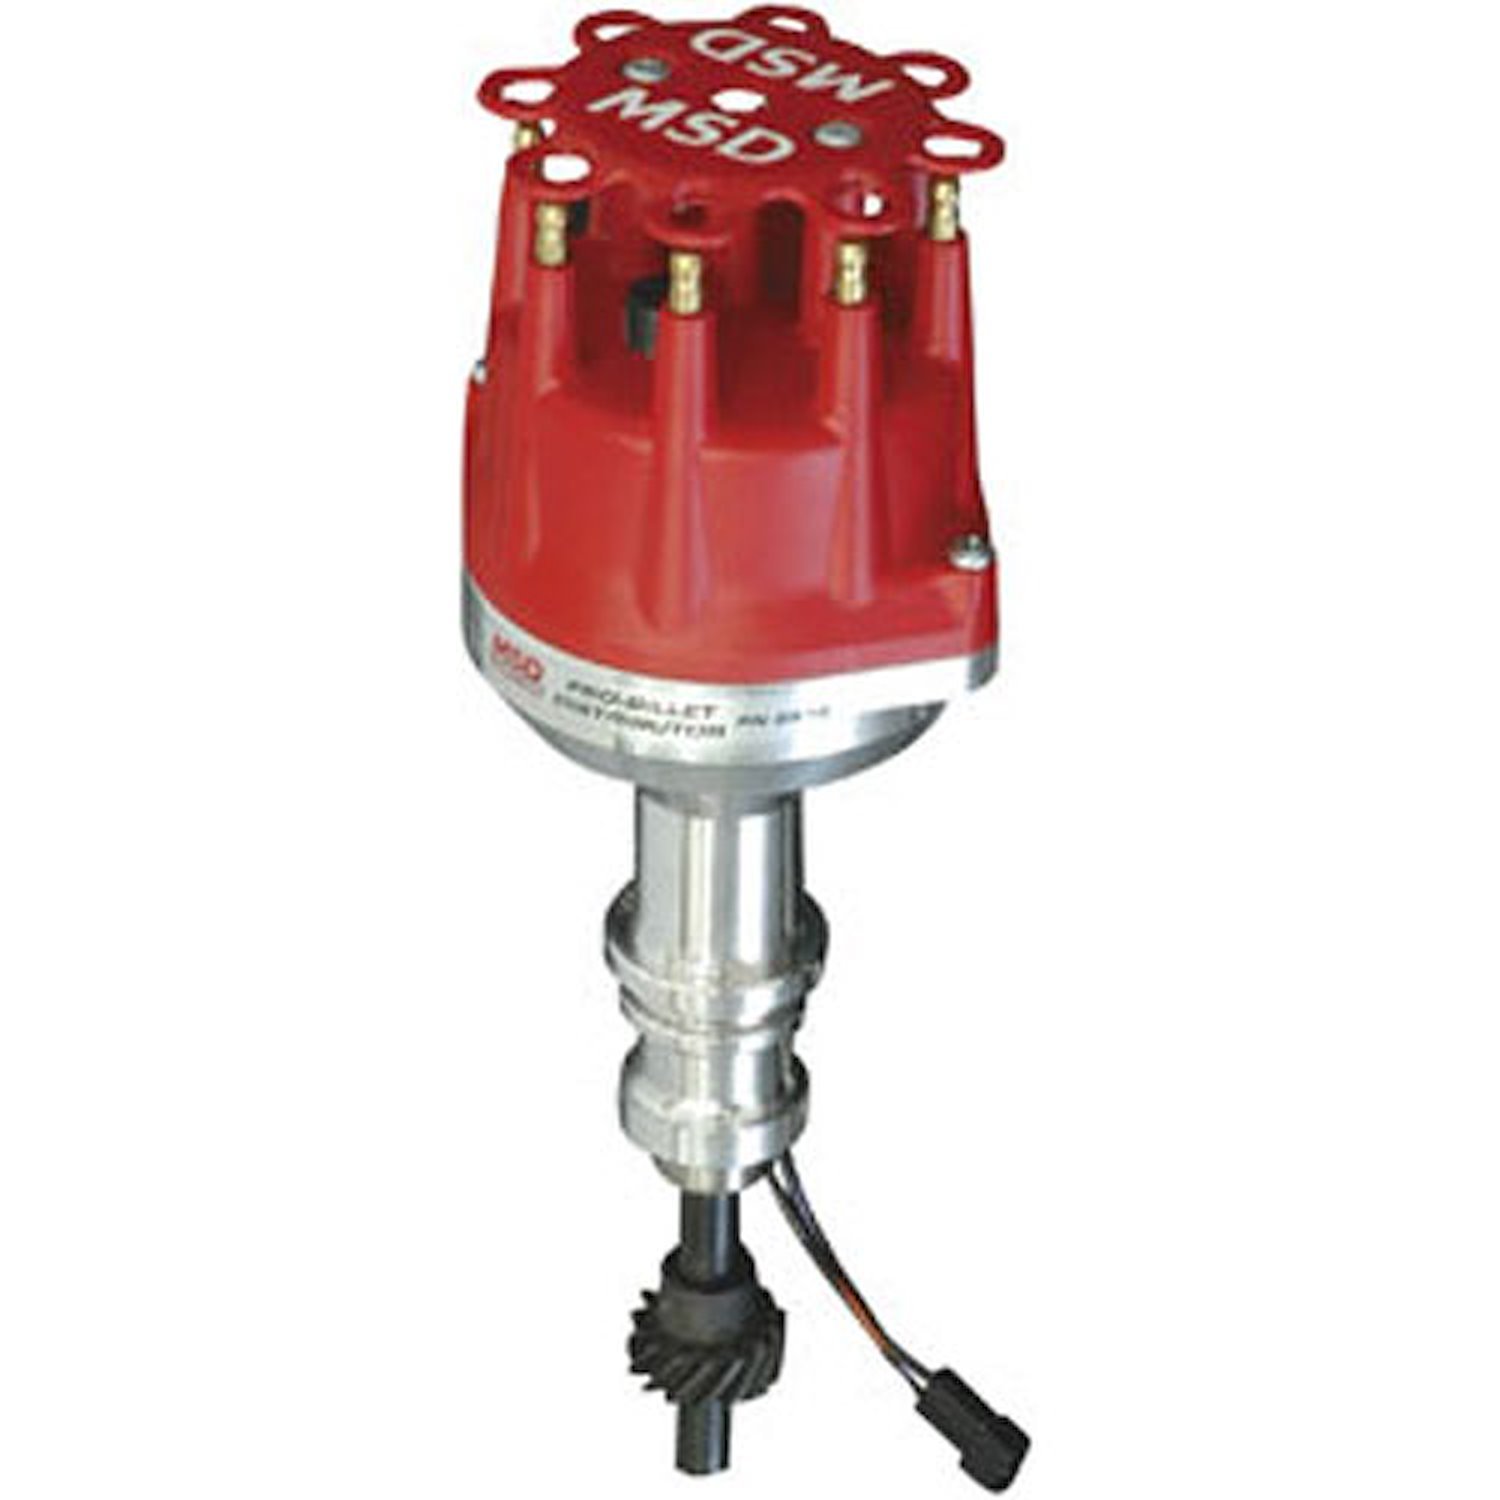 Pro-Billet Small Cap Distributor Small Block Ford 302 Red